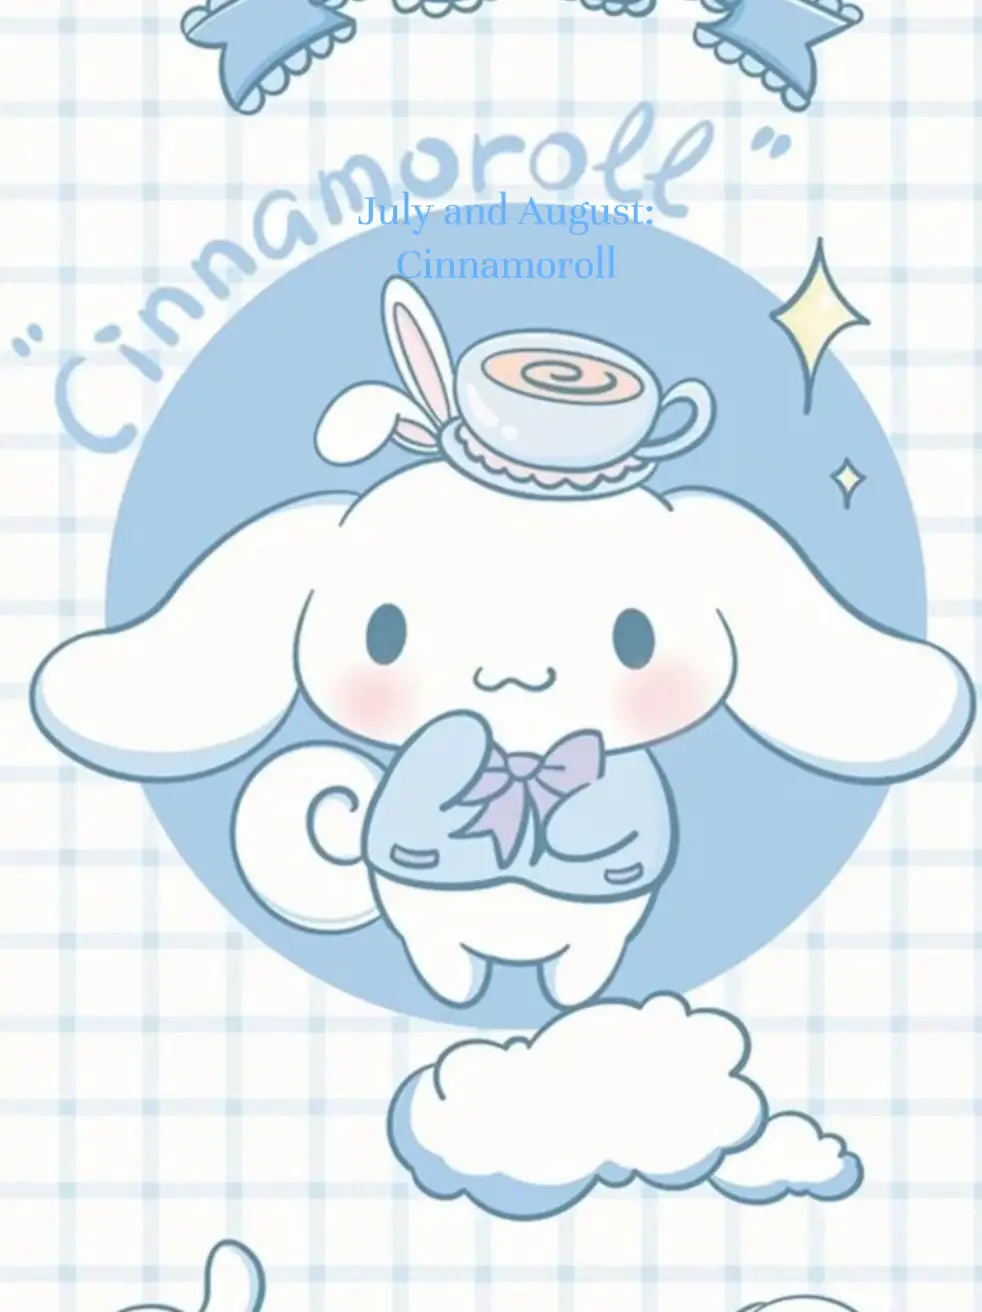 5 Facts You Didn't Know About Cinnamoroll - YumeTwins: The Monthly